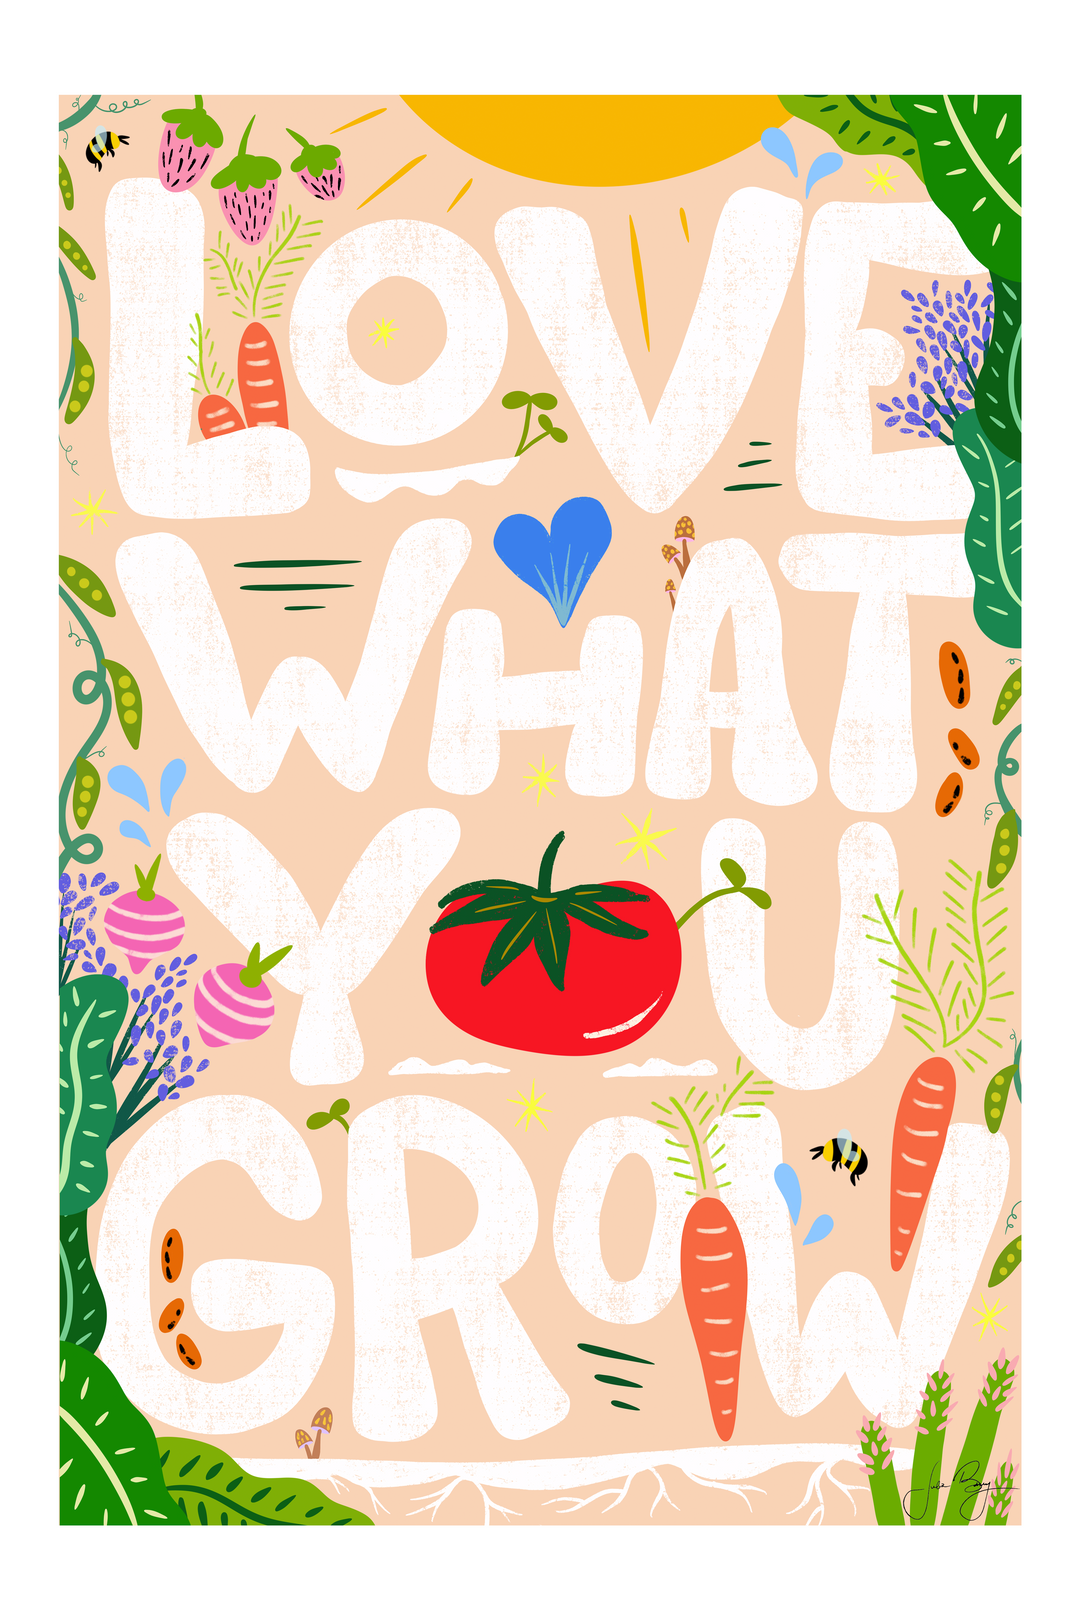 "Love What You Grow" Eco Recycled Greeting Card w. Hand-Drawn Art w. Vegetables, Fruit, Bees & Sun + Recycled Envelope, Blank inside (Grow & Bloom)